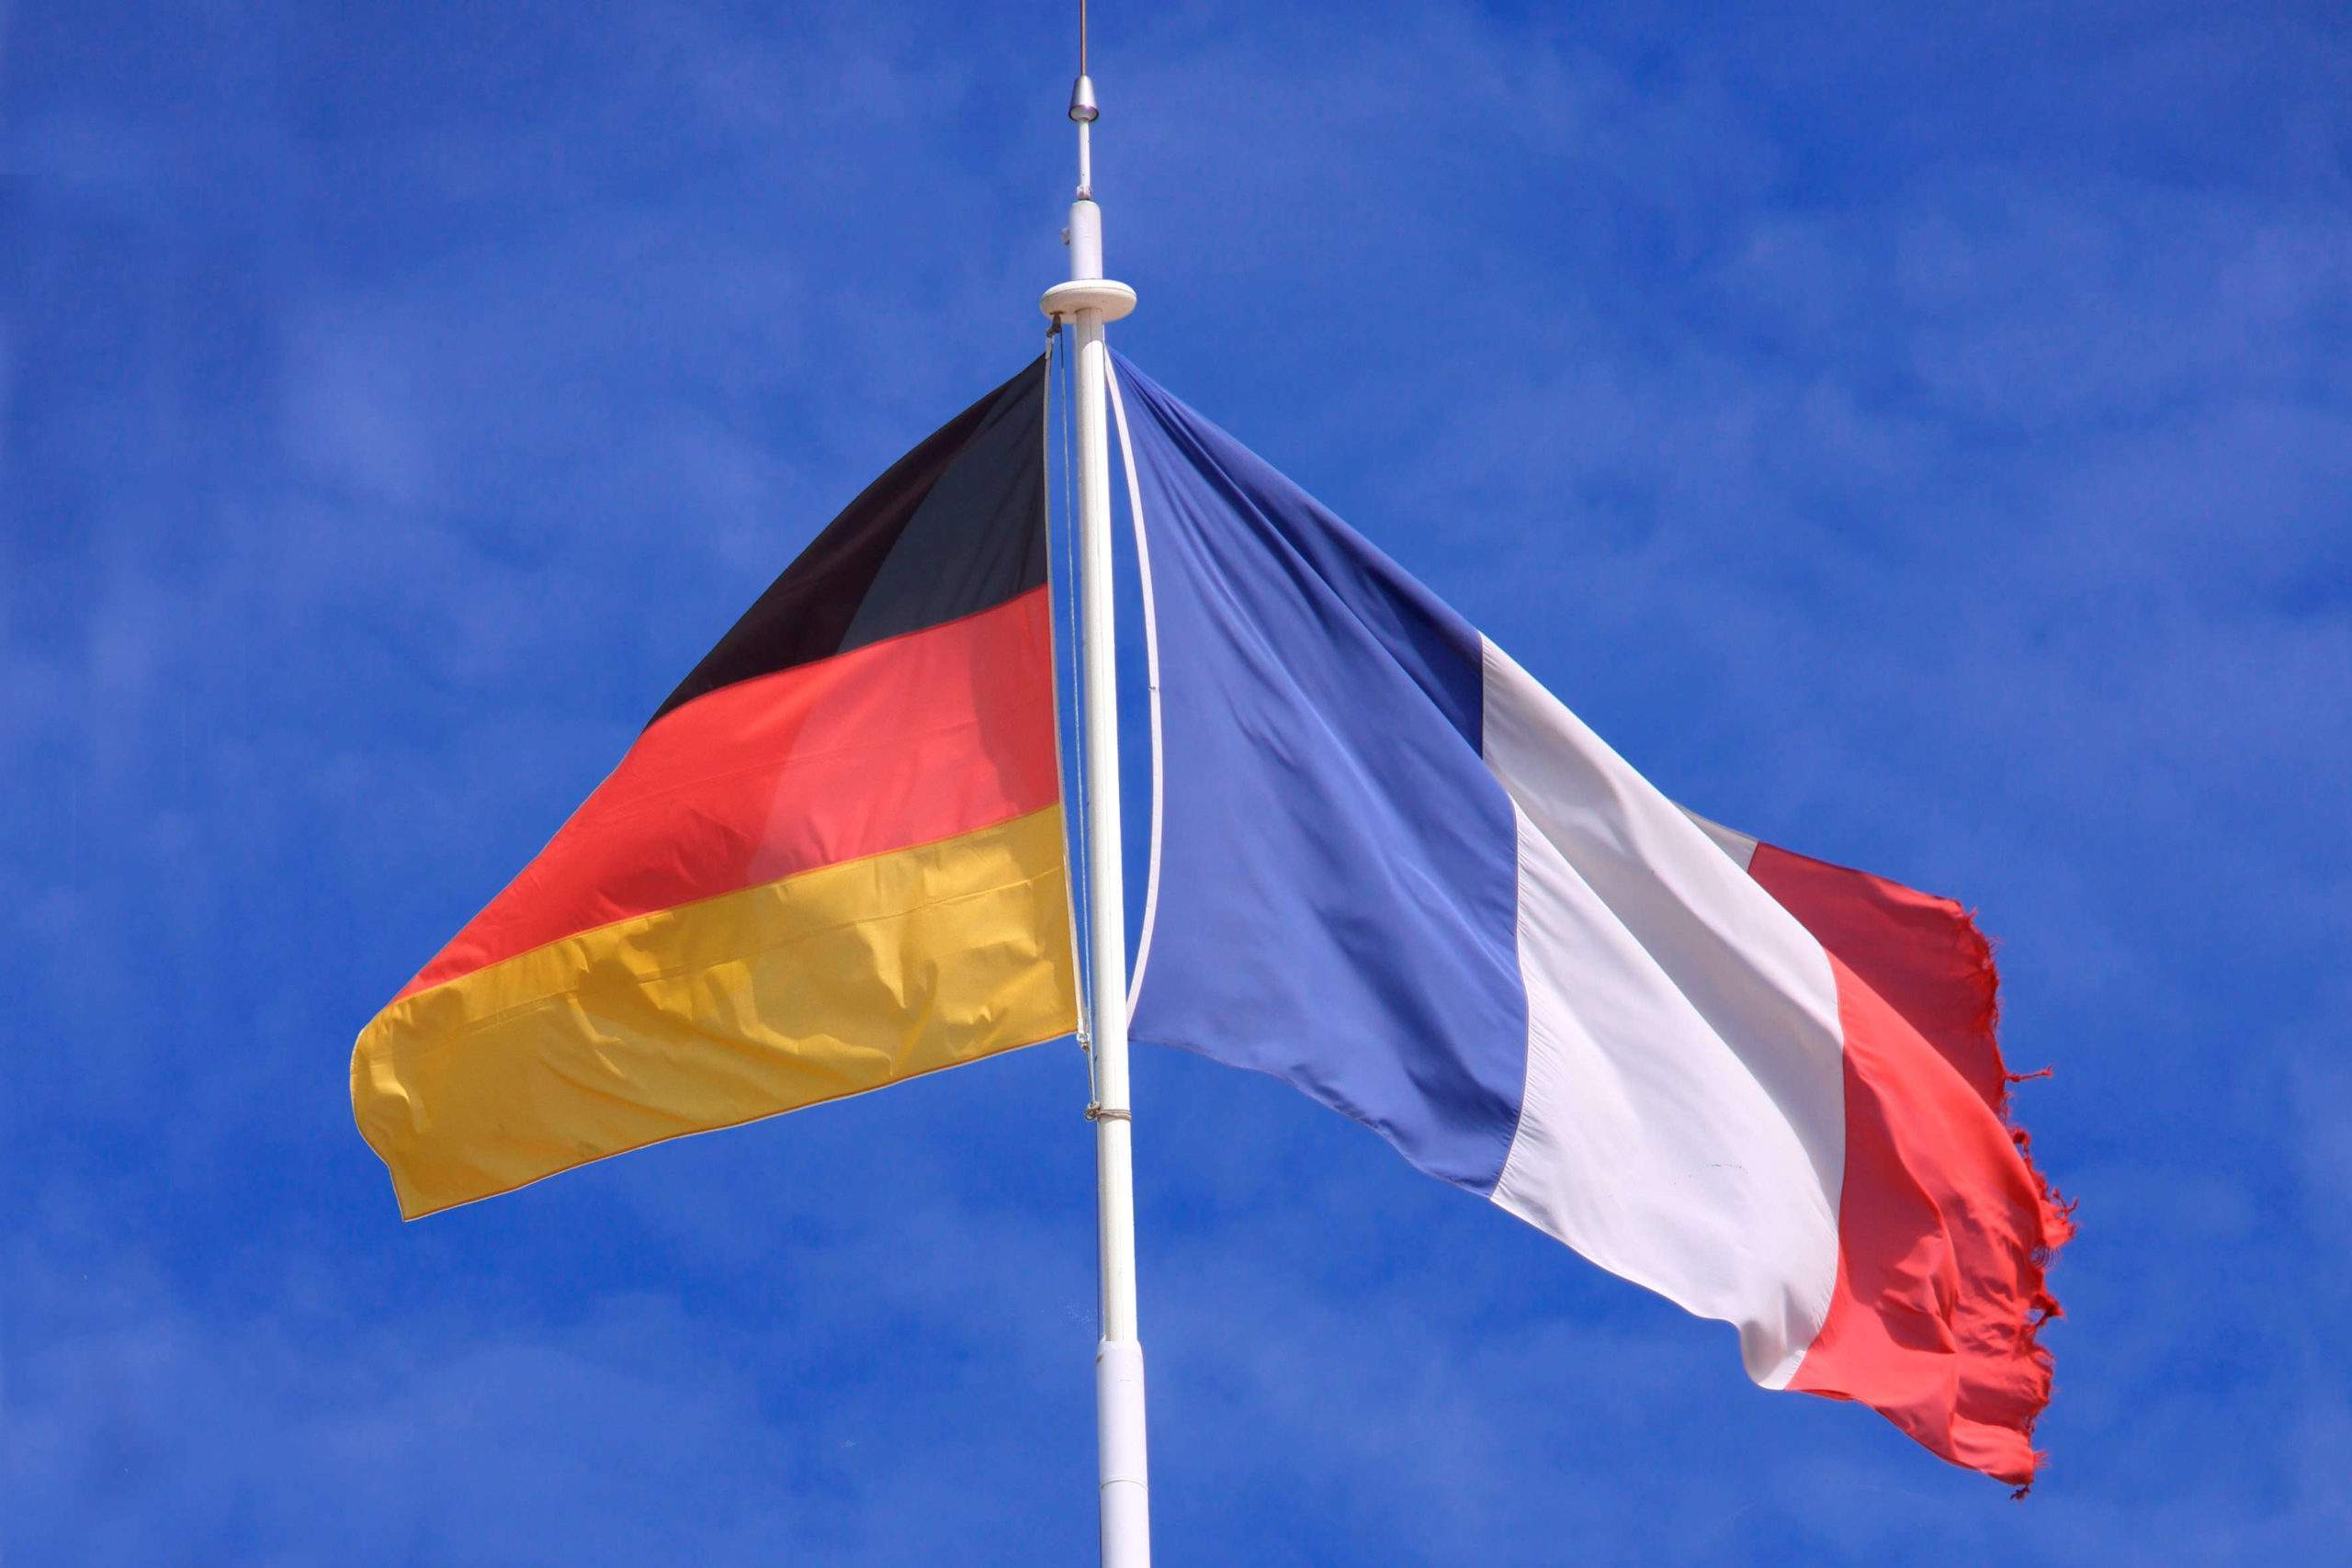 French and German flags